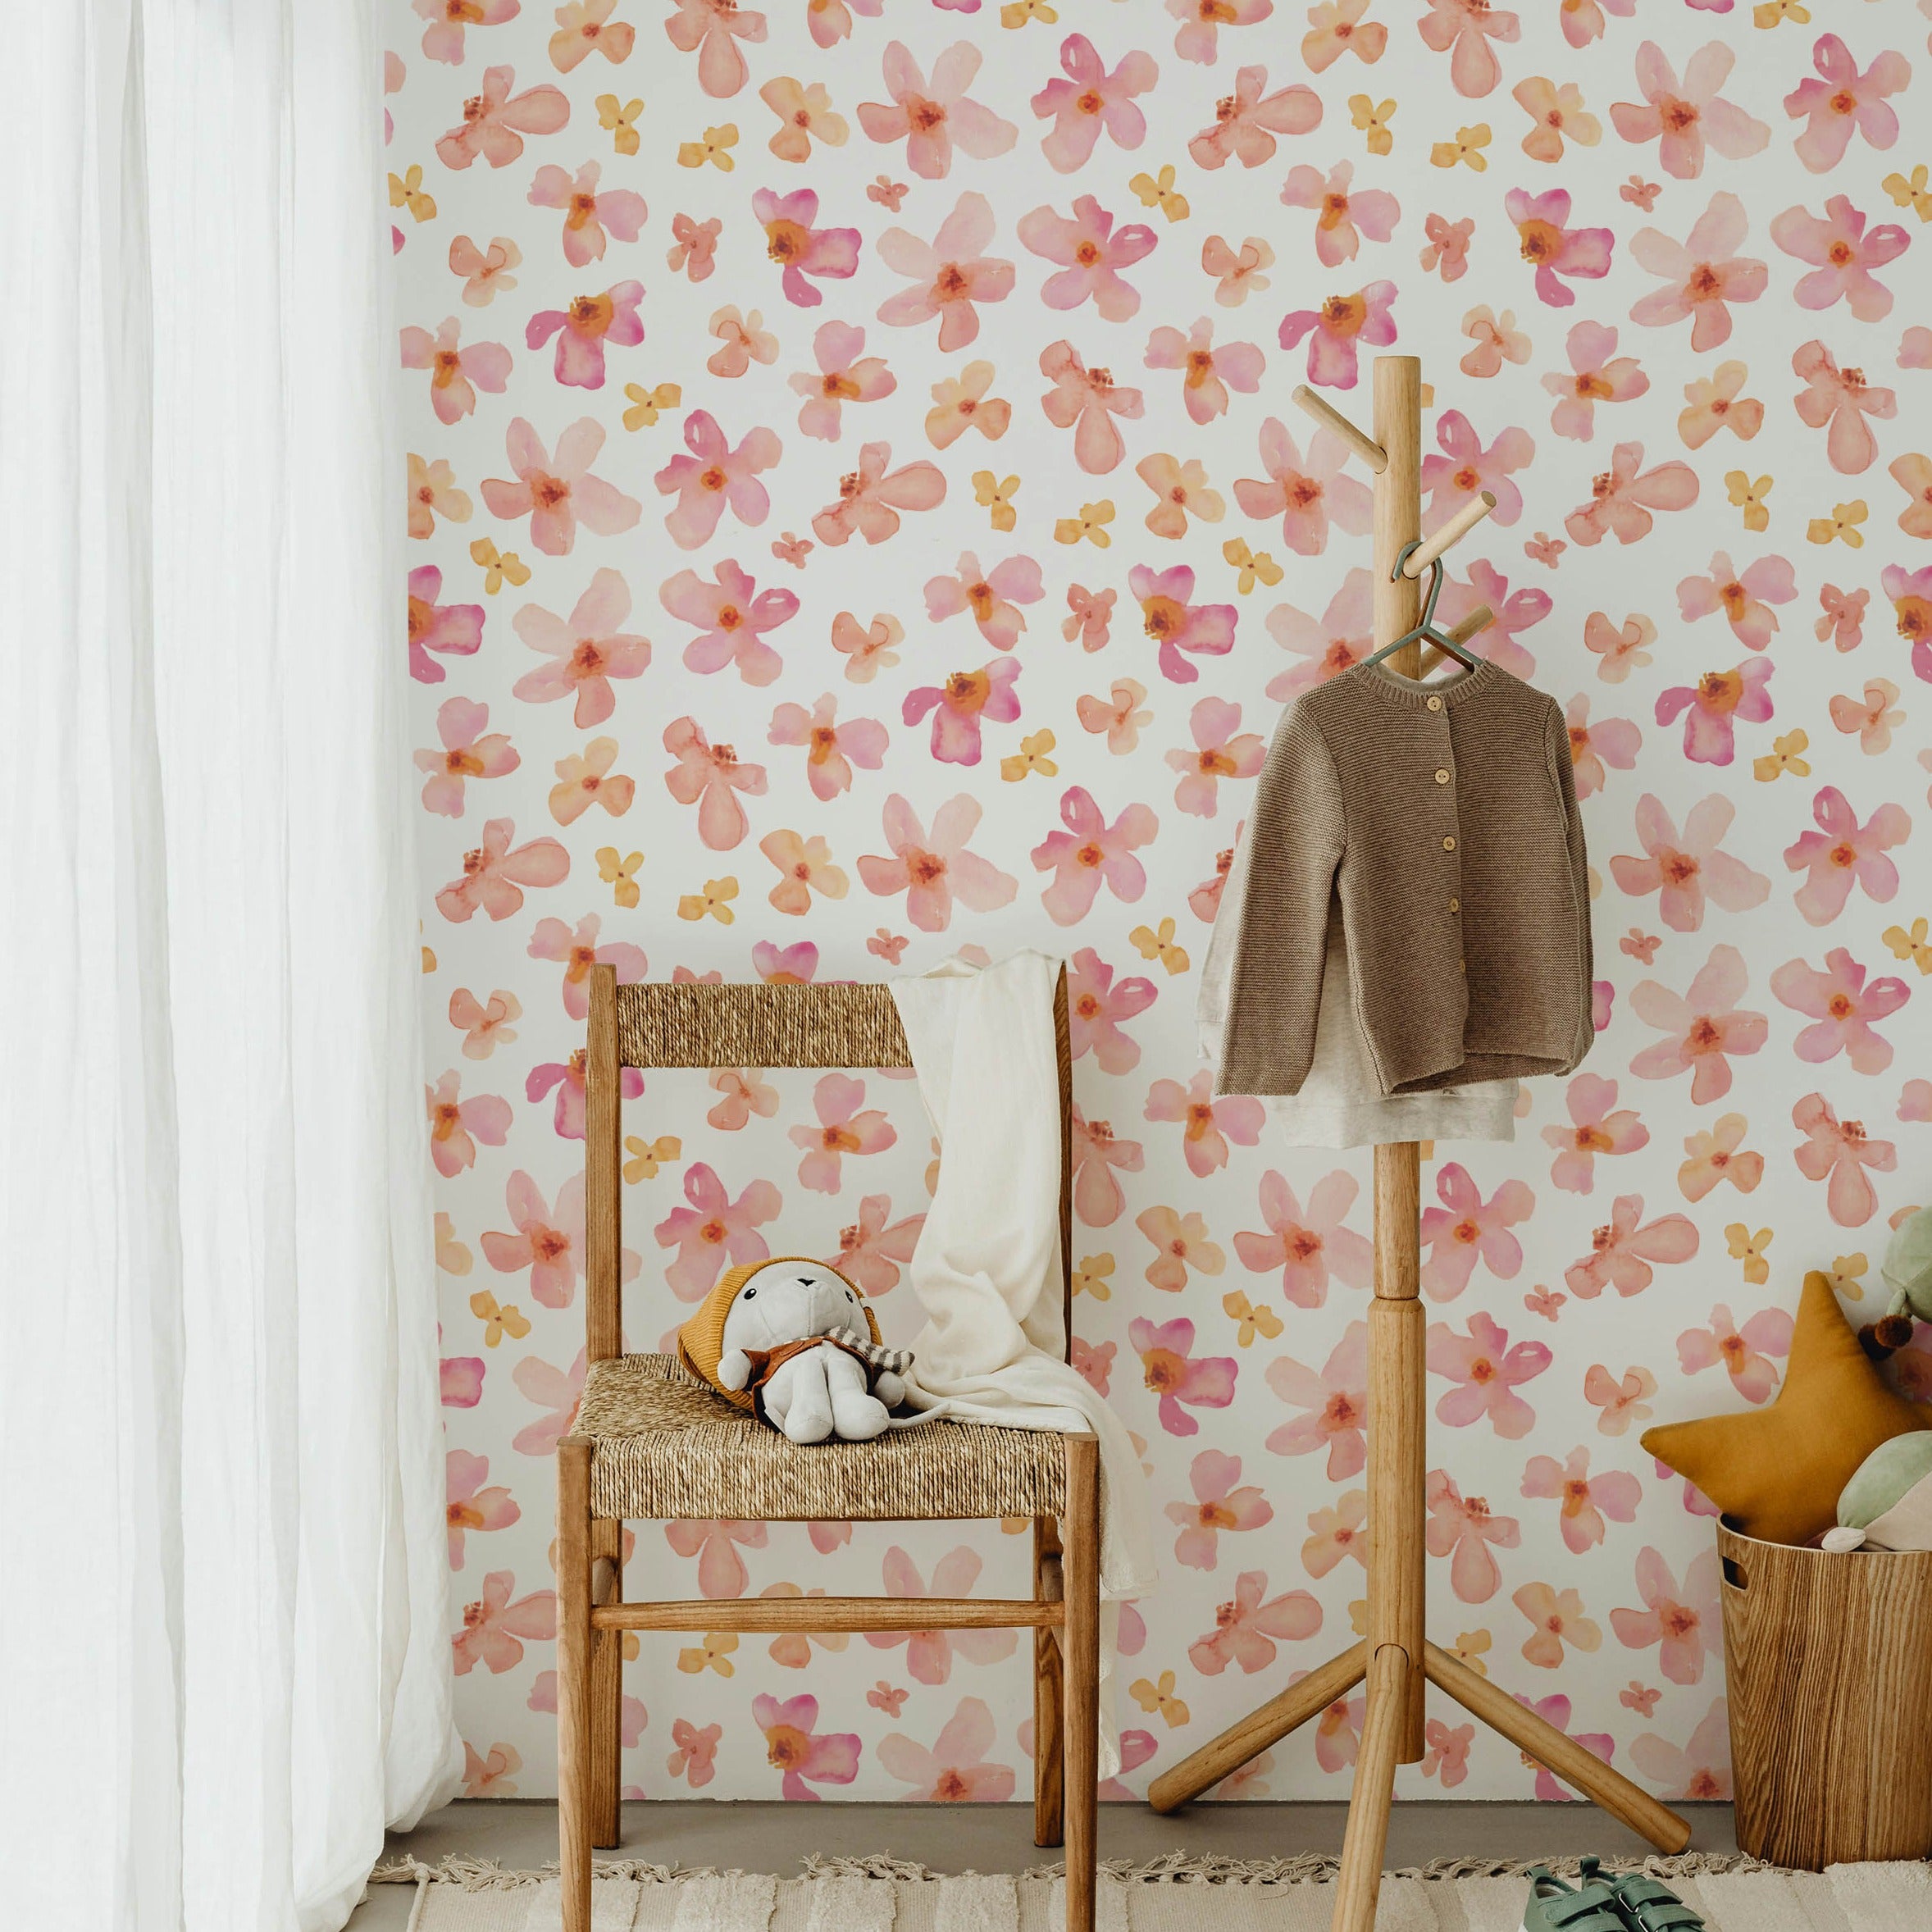 A charming nursery room decorated with Peachy Floral Wallpaper, featuring pink and peach watercolor flowers. The room includes a wooden chair with a straw seat, a stuffed animal, and a small children’s coat rack with a sweater. Soft-colored pillows and a round rug complement the gentle tones of the wallpaper.